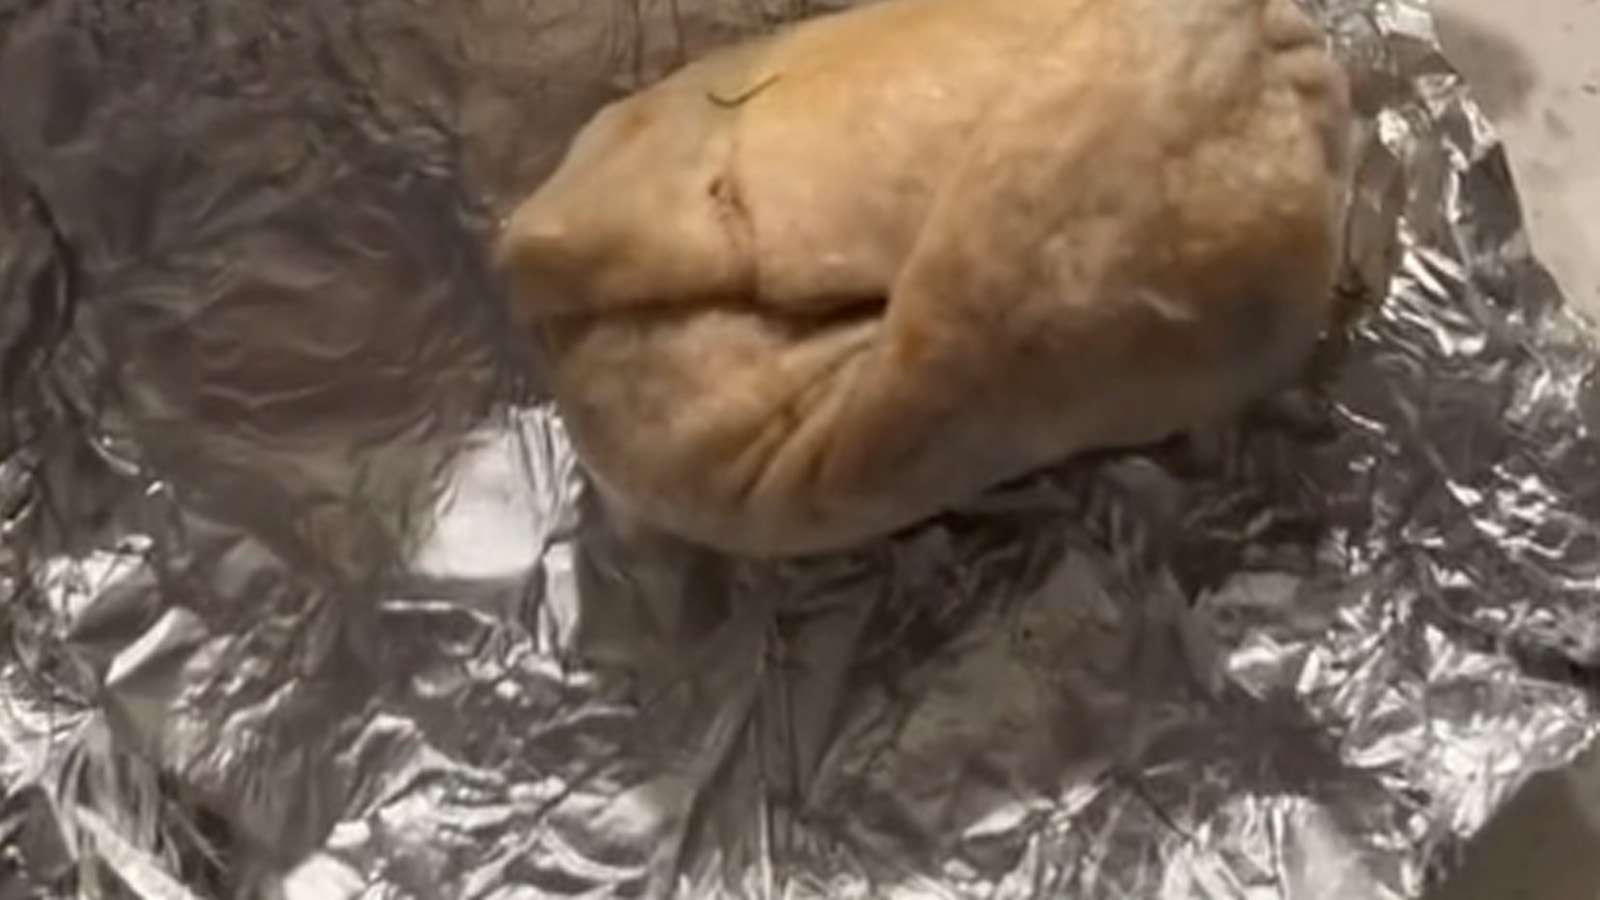 Chipotle slammed for stingy portions after customer receives micro burrito